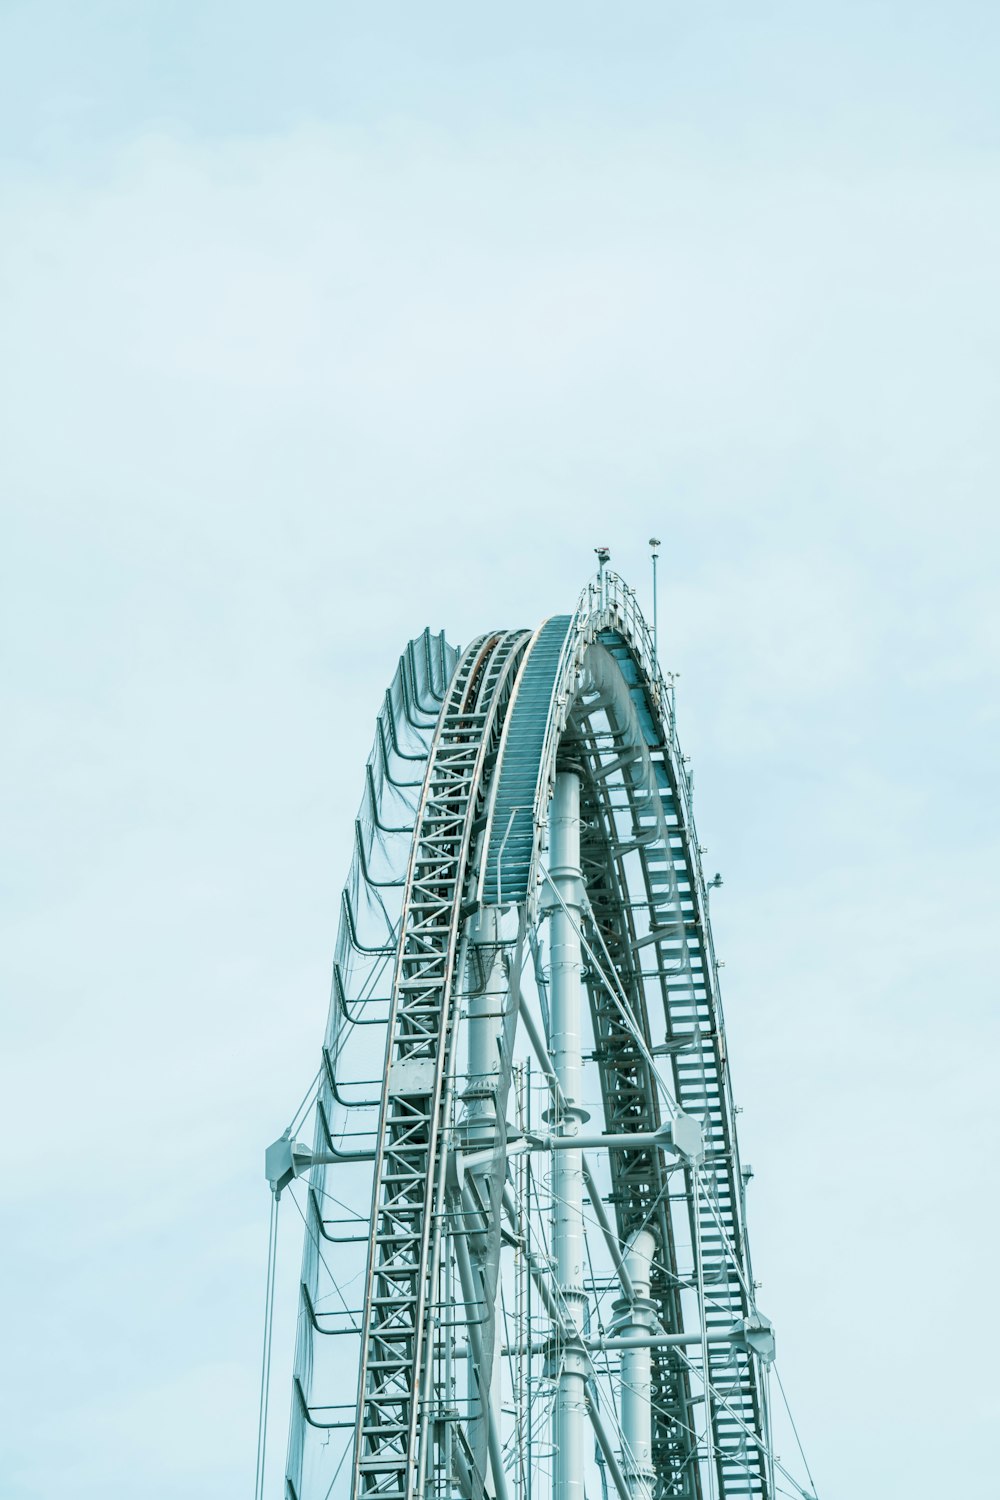 a roller coaster going down a hill on a cloudy day